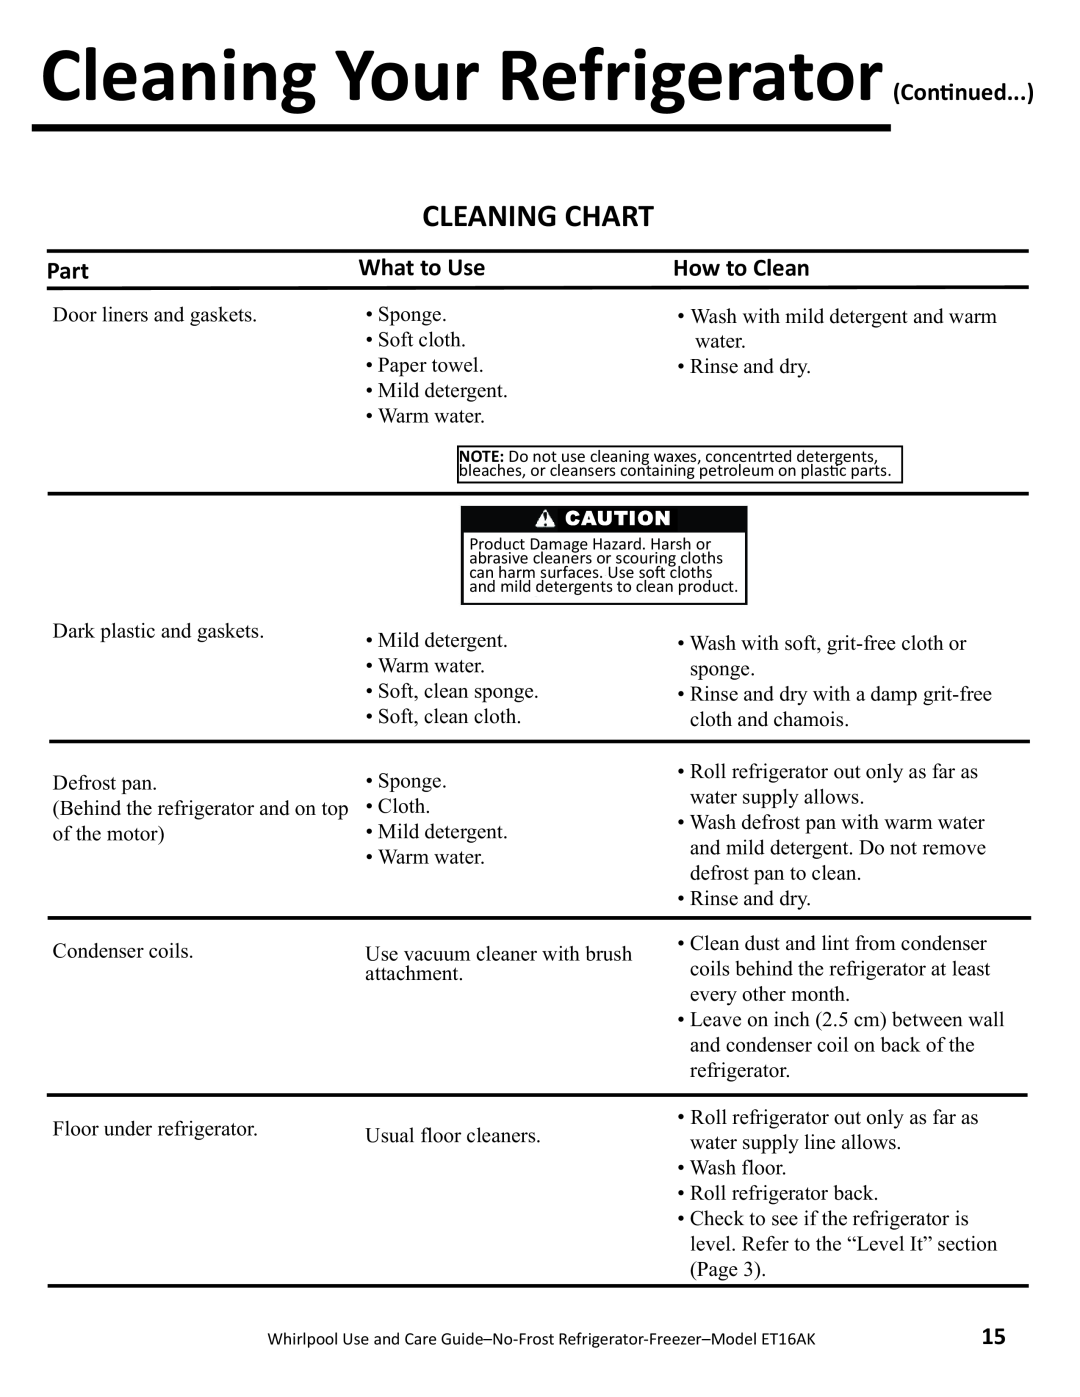 Whirlpool ET16AK manual Cleaning Your RefrigeratorCon/nued, Cleaning Chart, Part, What to Use, How to Clean 